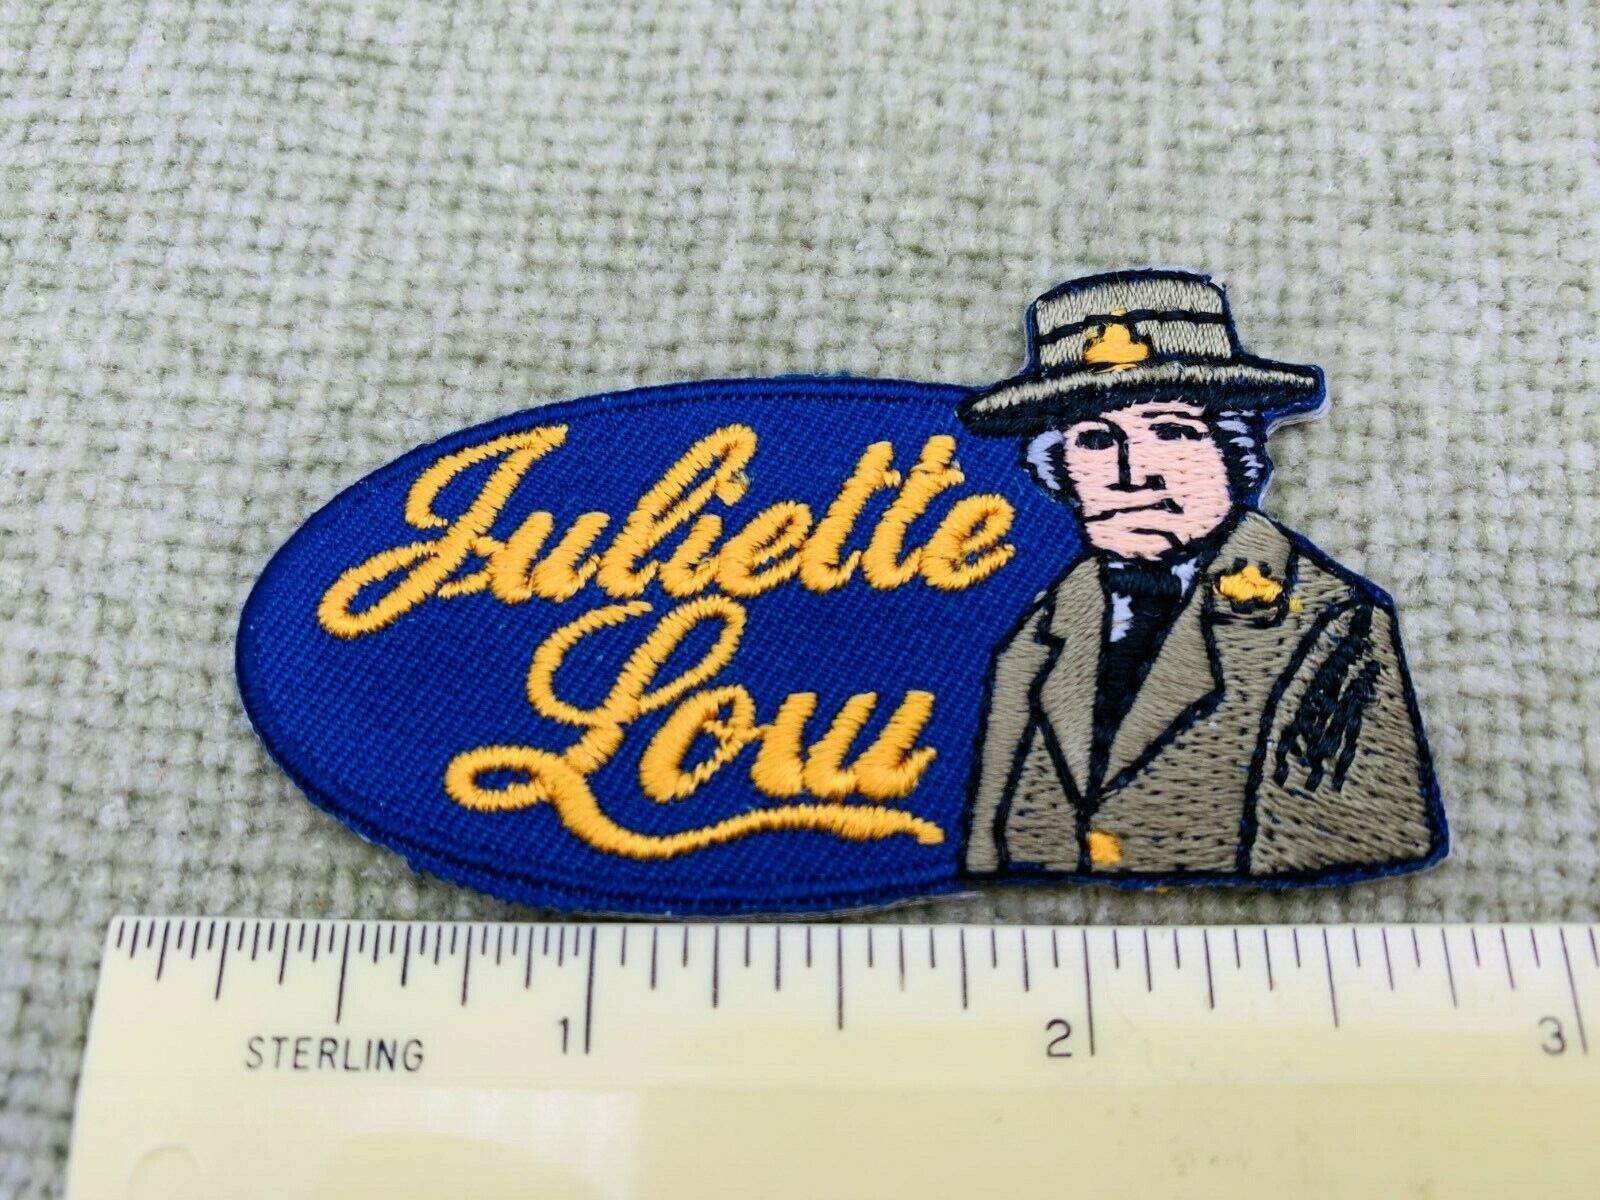 Juliette Low Girl Scout Blue Embroidered Patch From Birthplace Savannah 2000s